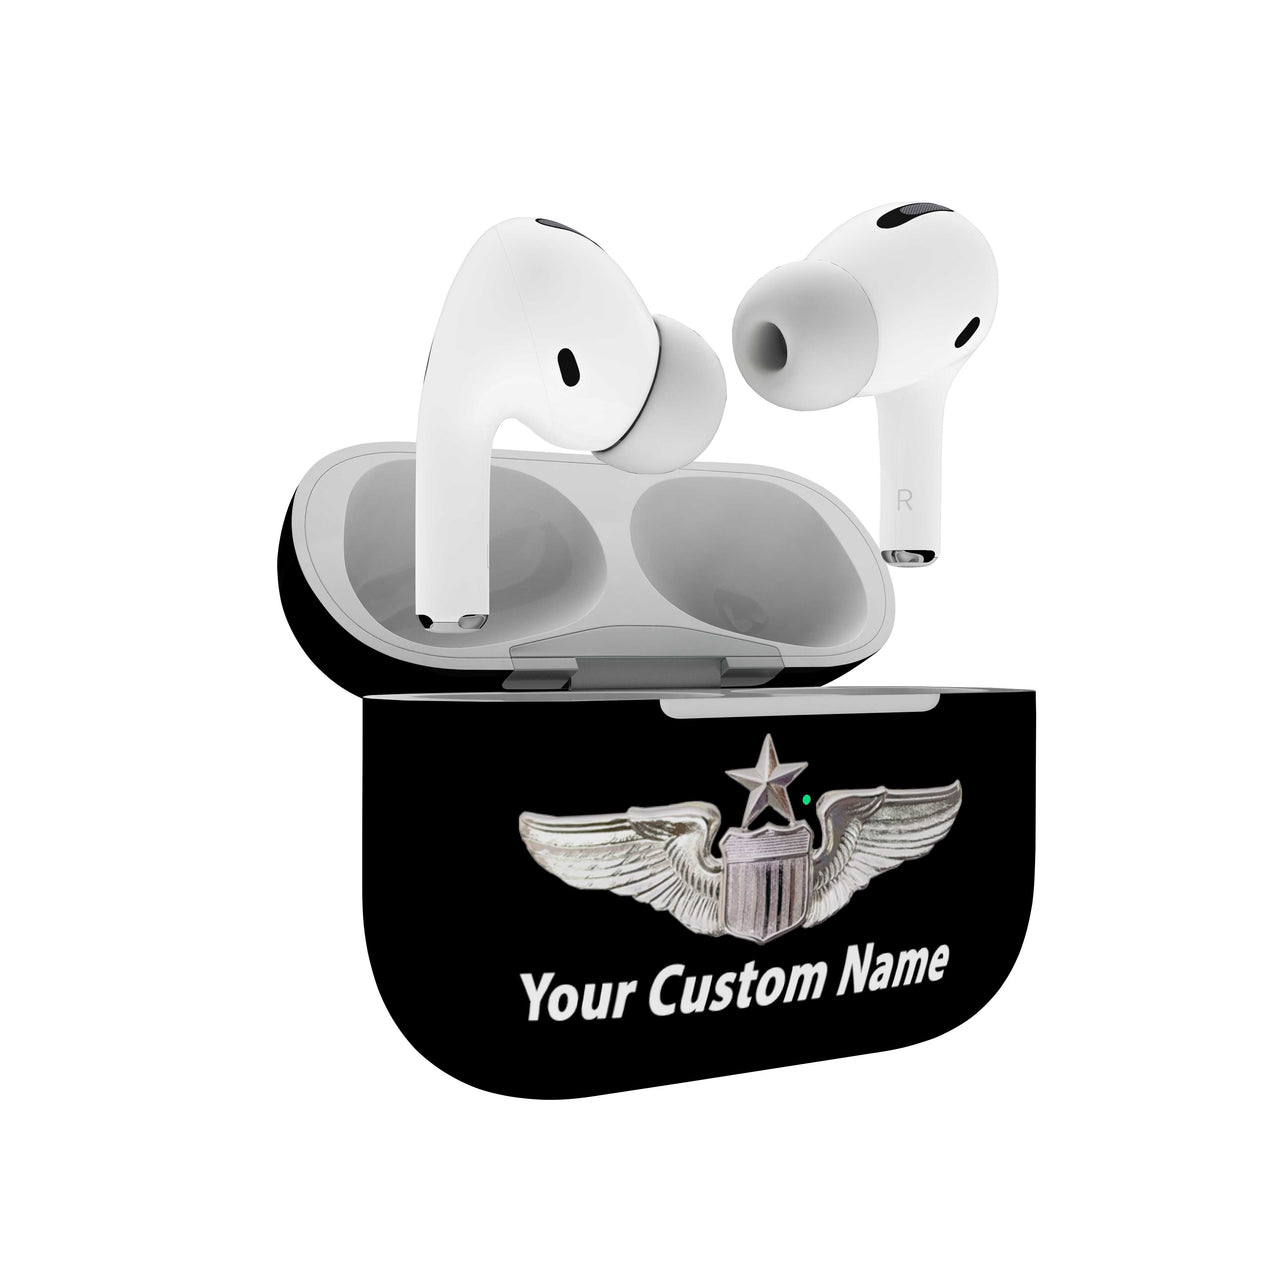 Custom Name (US Air Force & Star) Designed Airpods "Pro" Cases